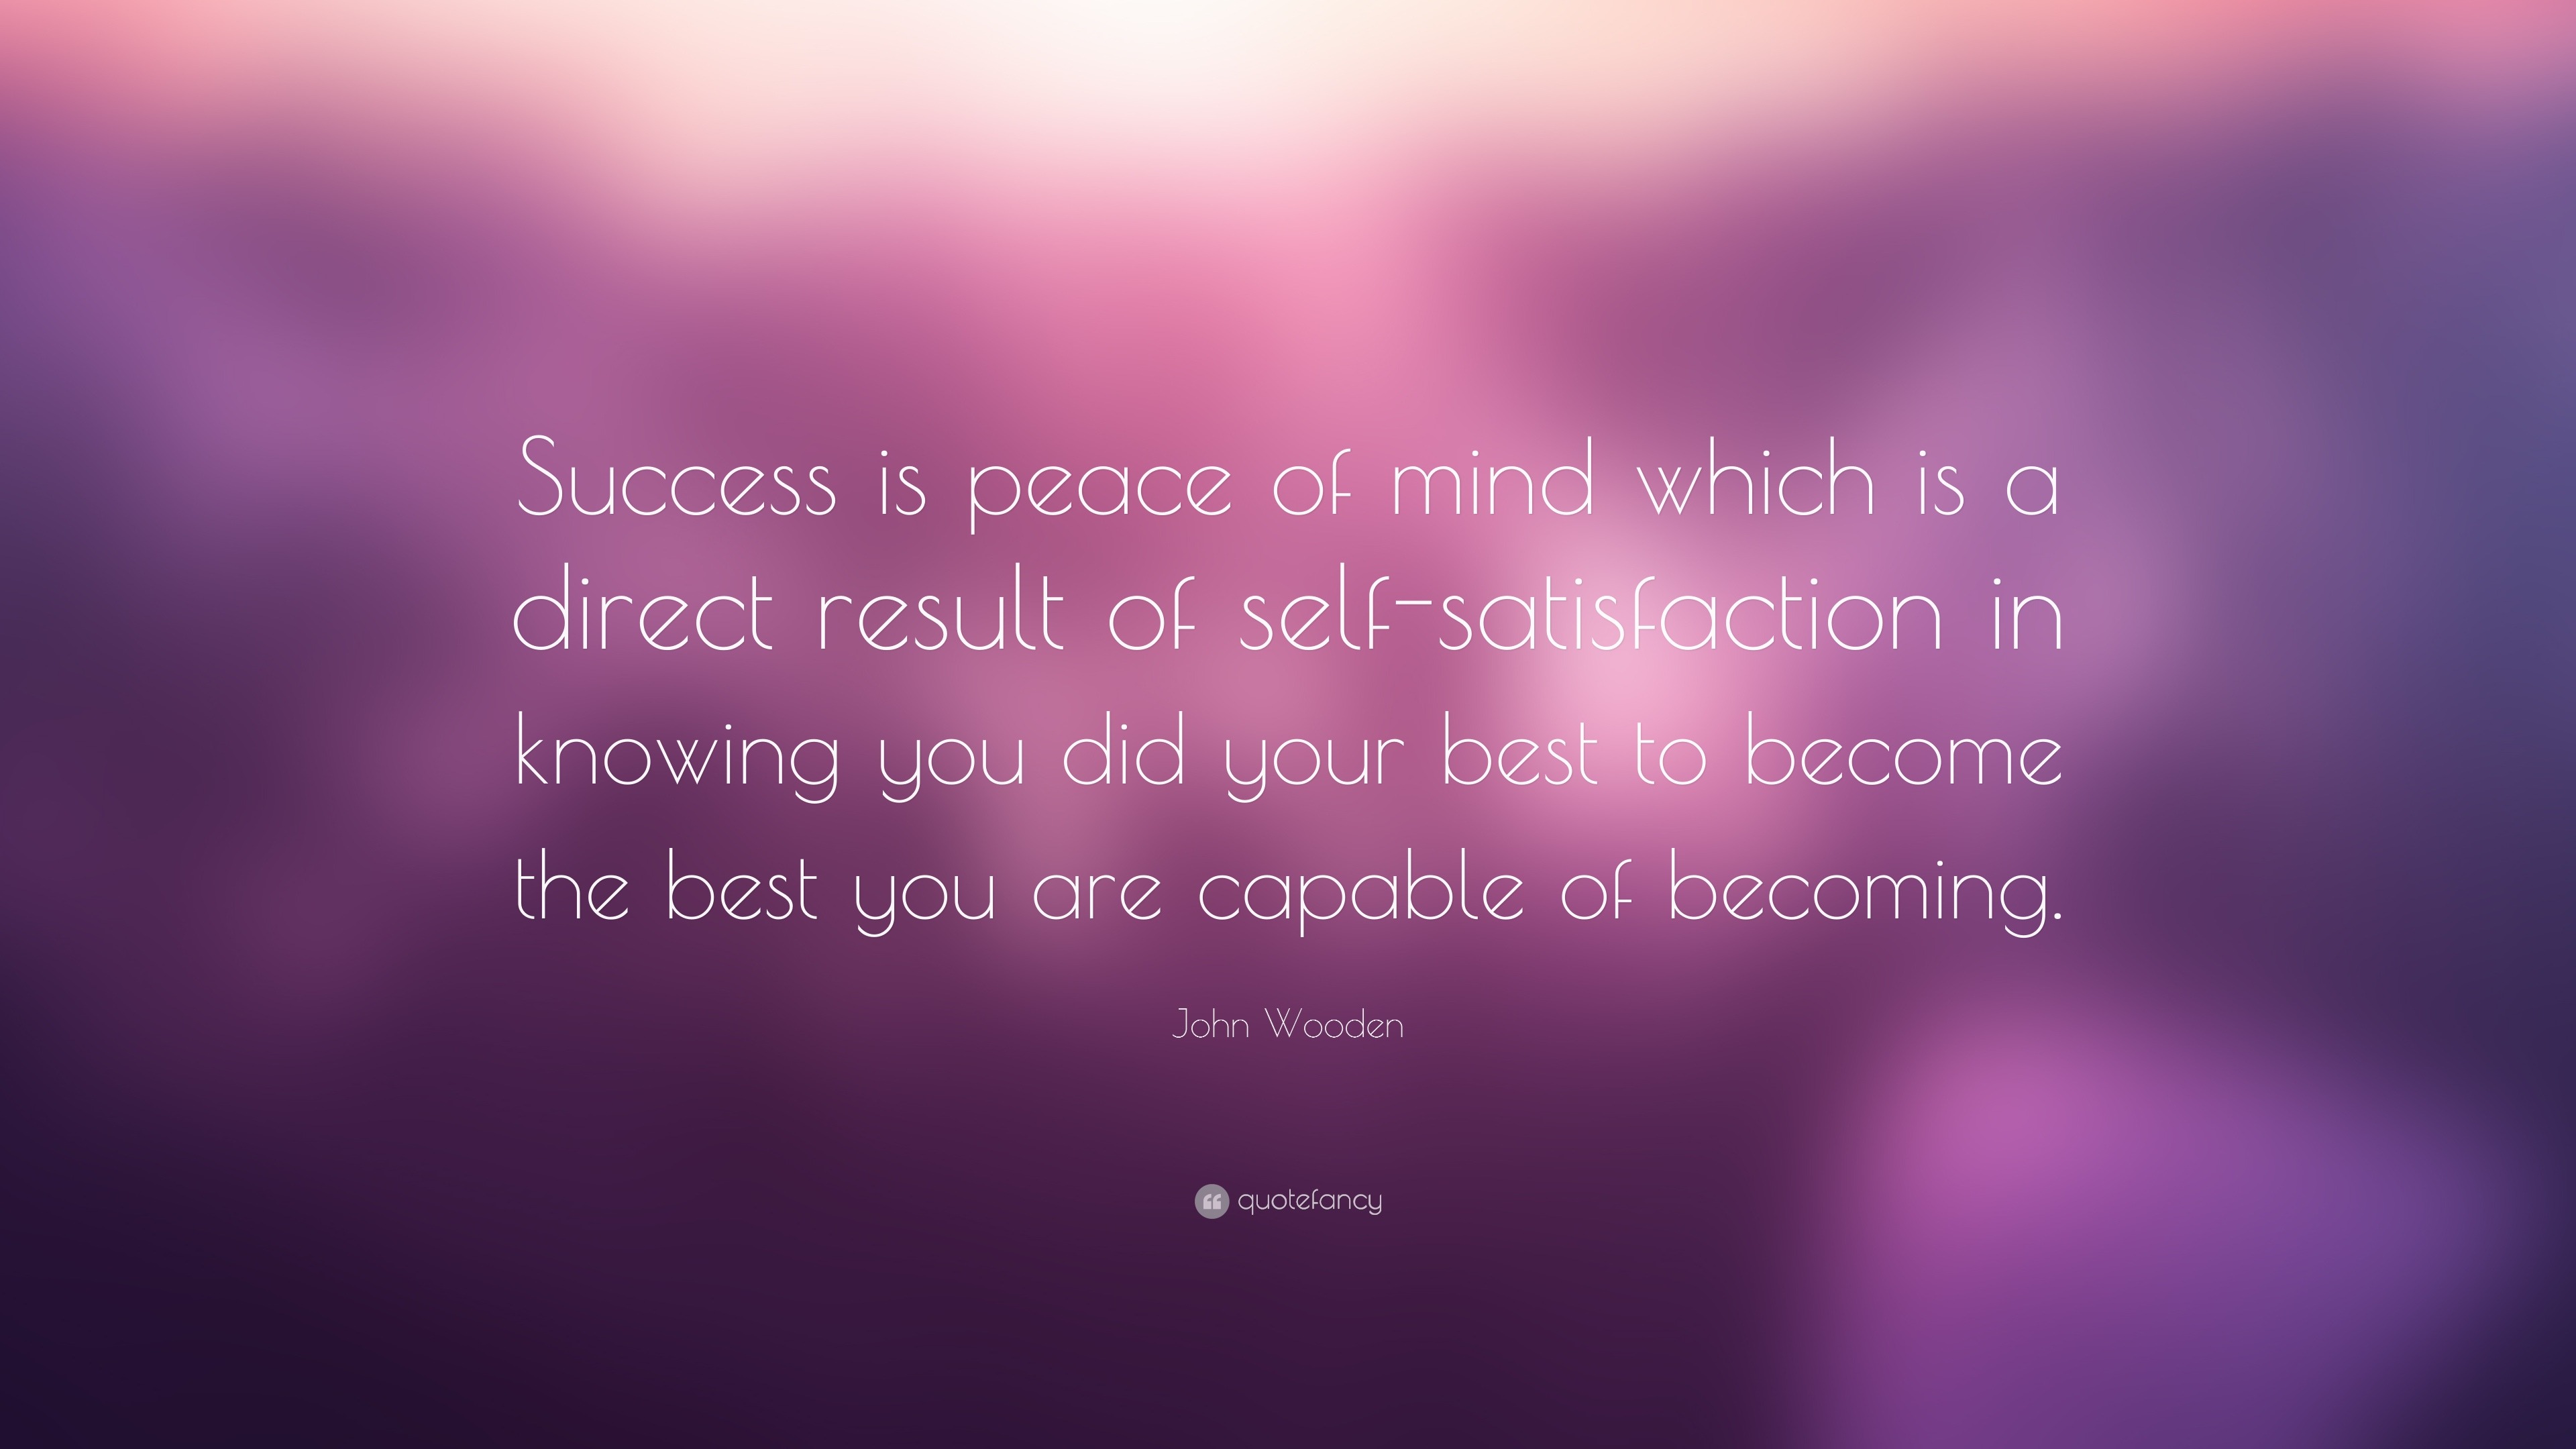 John Wooden Quote: “Success is peace of mind which is a direct result